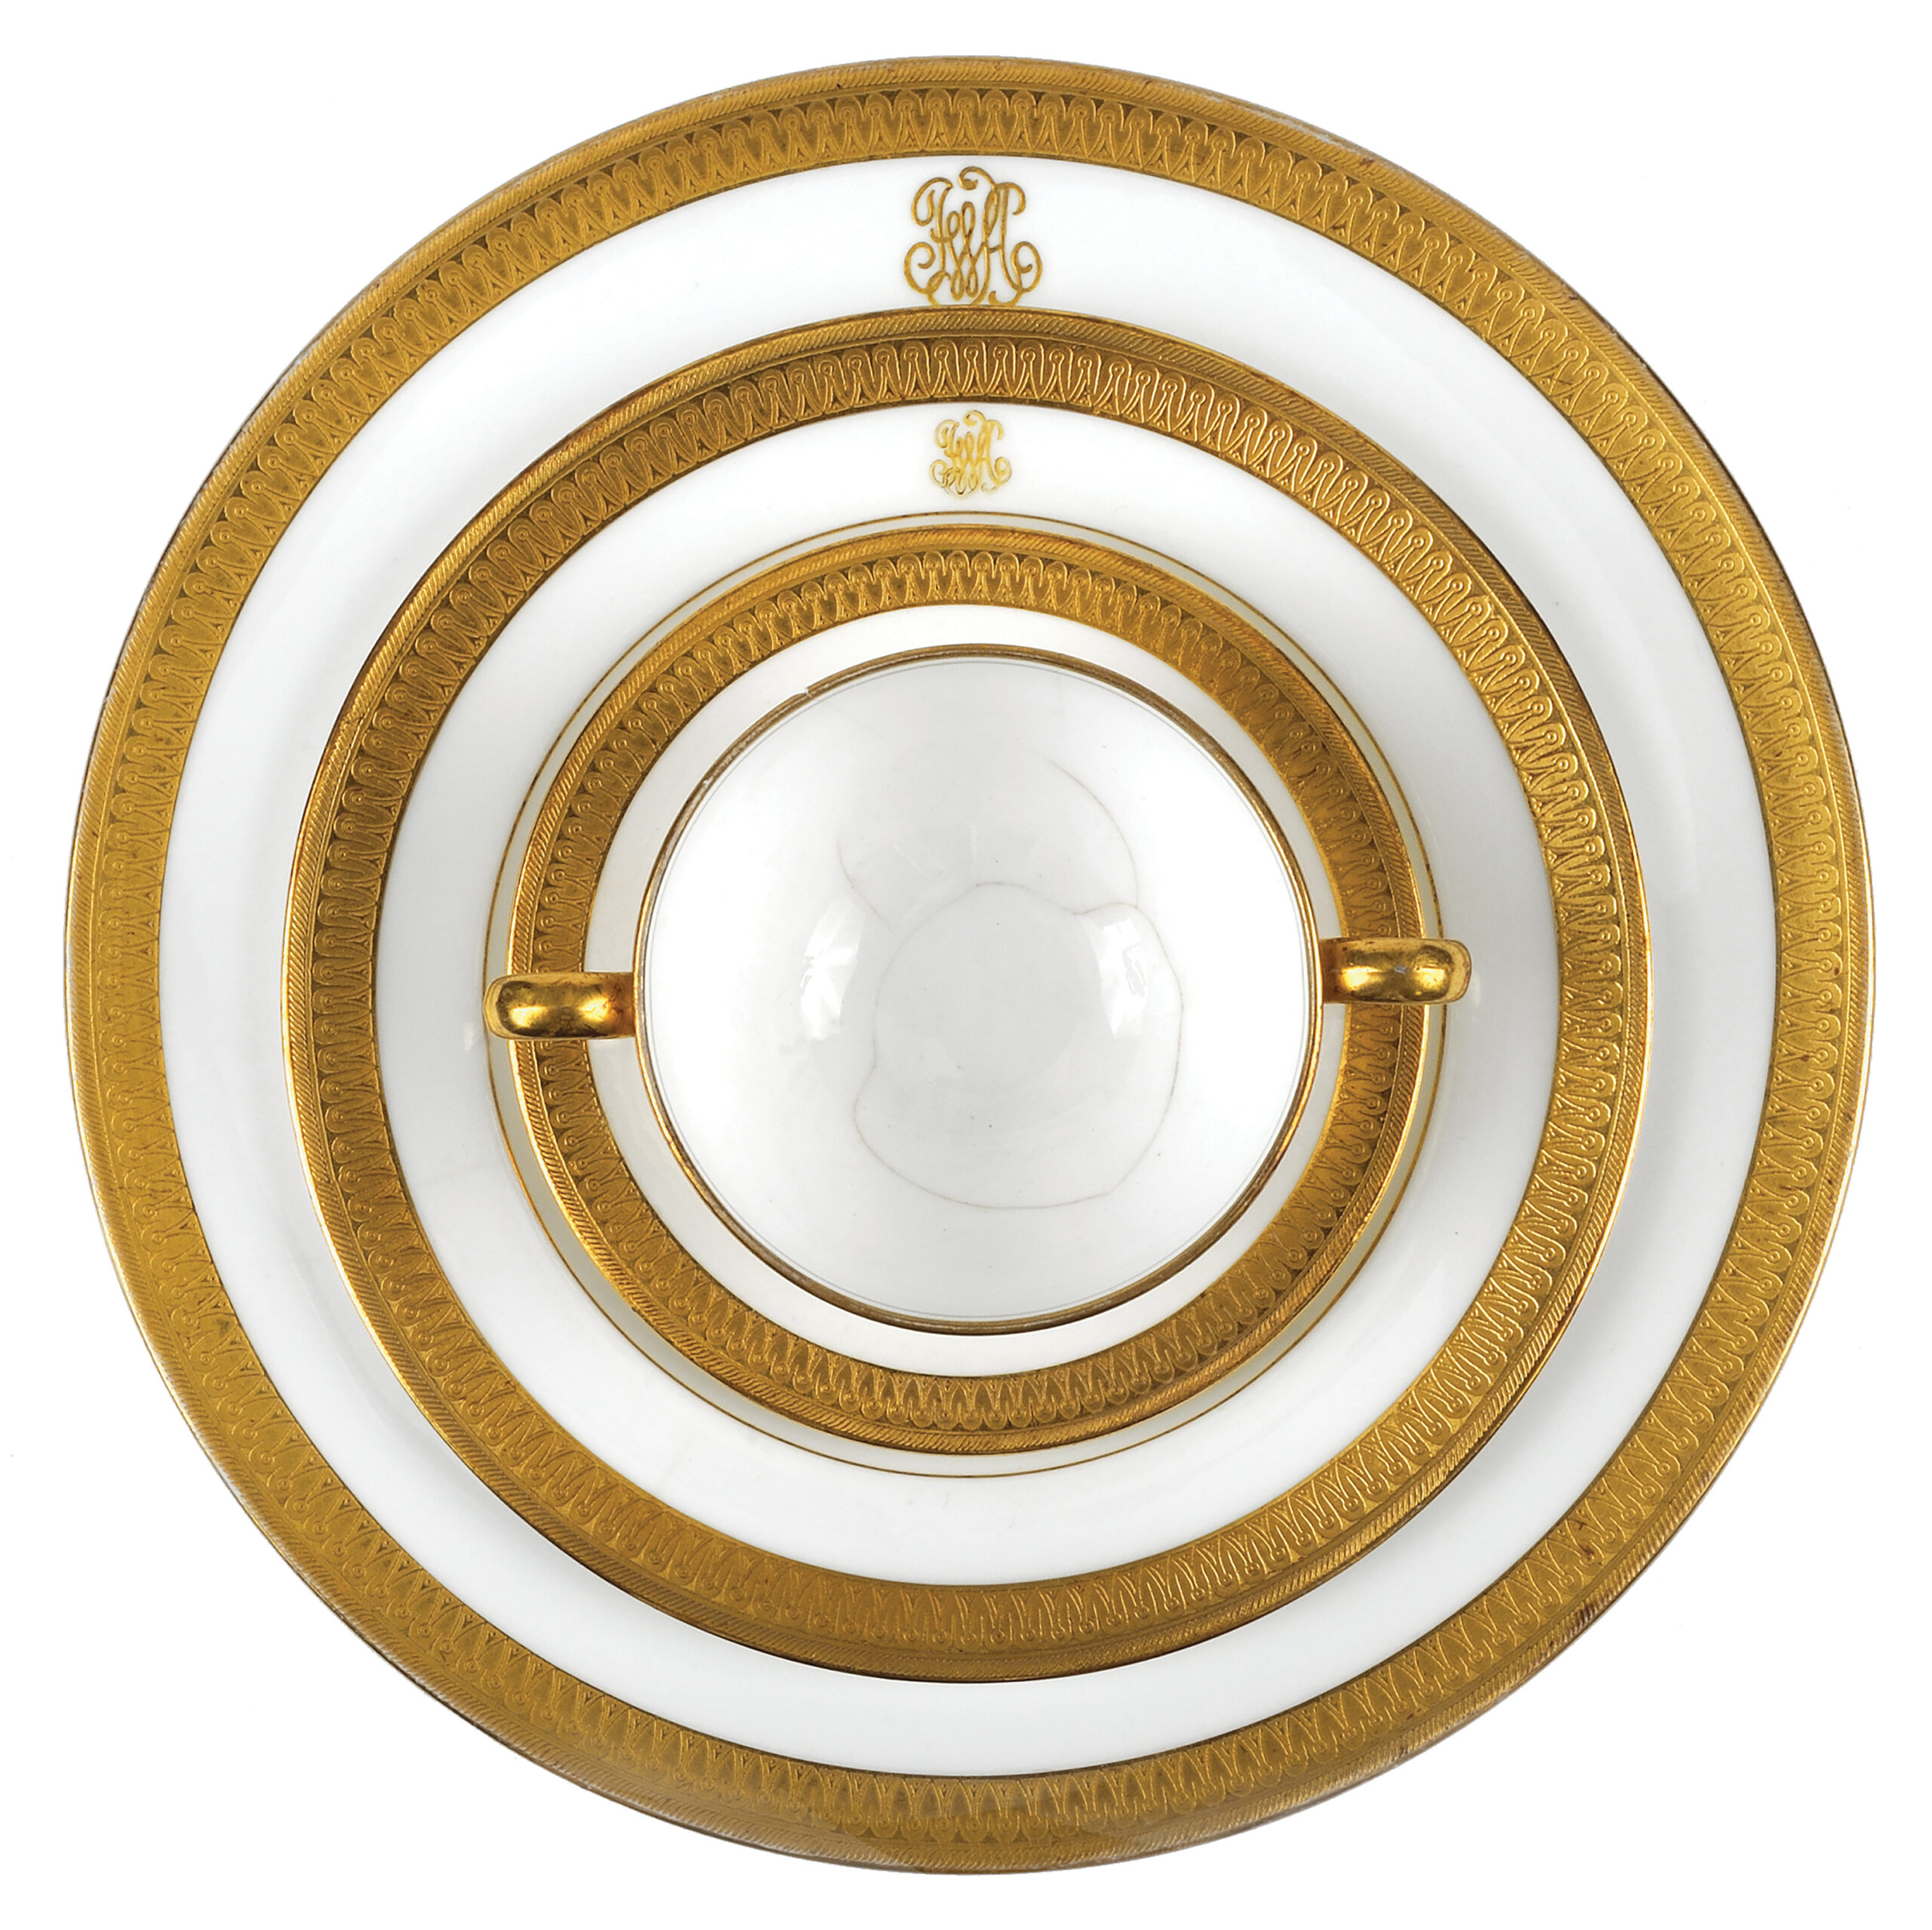 Three circular gold-and-white plates of different sizes stacked